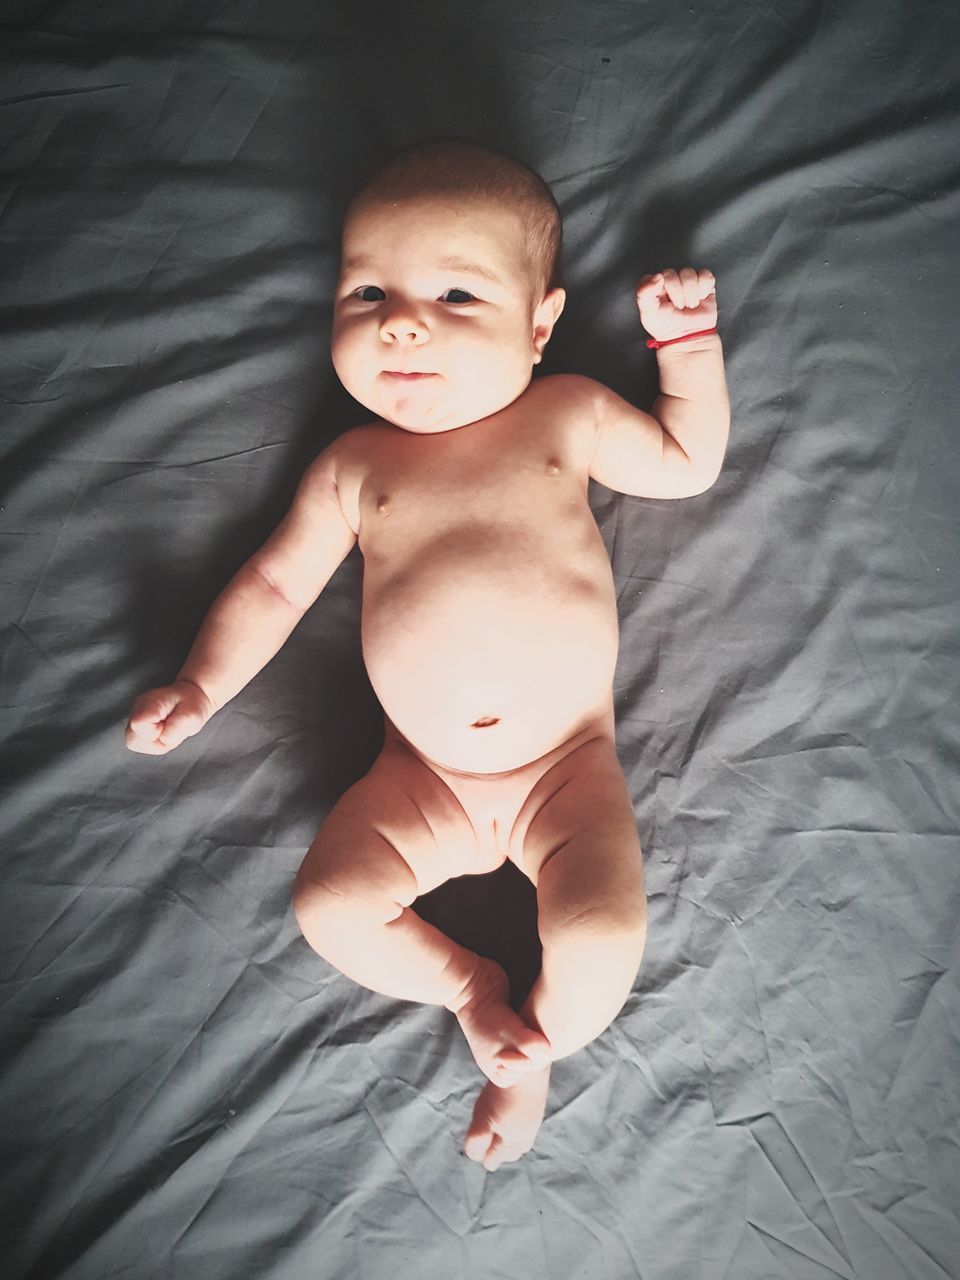 baby, bed, shirtless, indoors, high angle view, diaper, babyhood, one person, real people, bedroom, full length, directly above, lying on back, cute, childhood, sheet, babies only, portrait, day